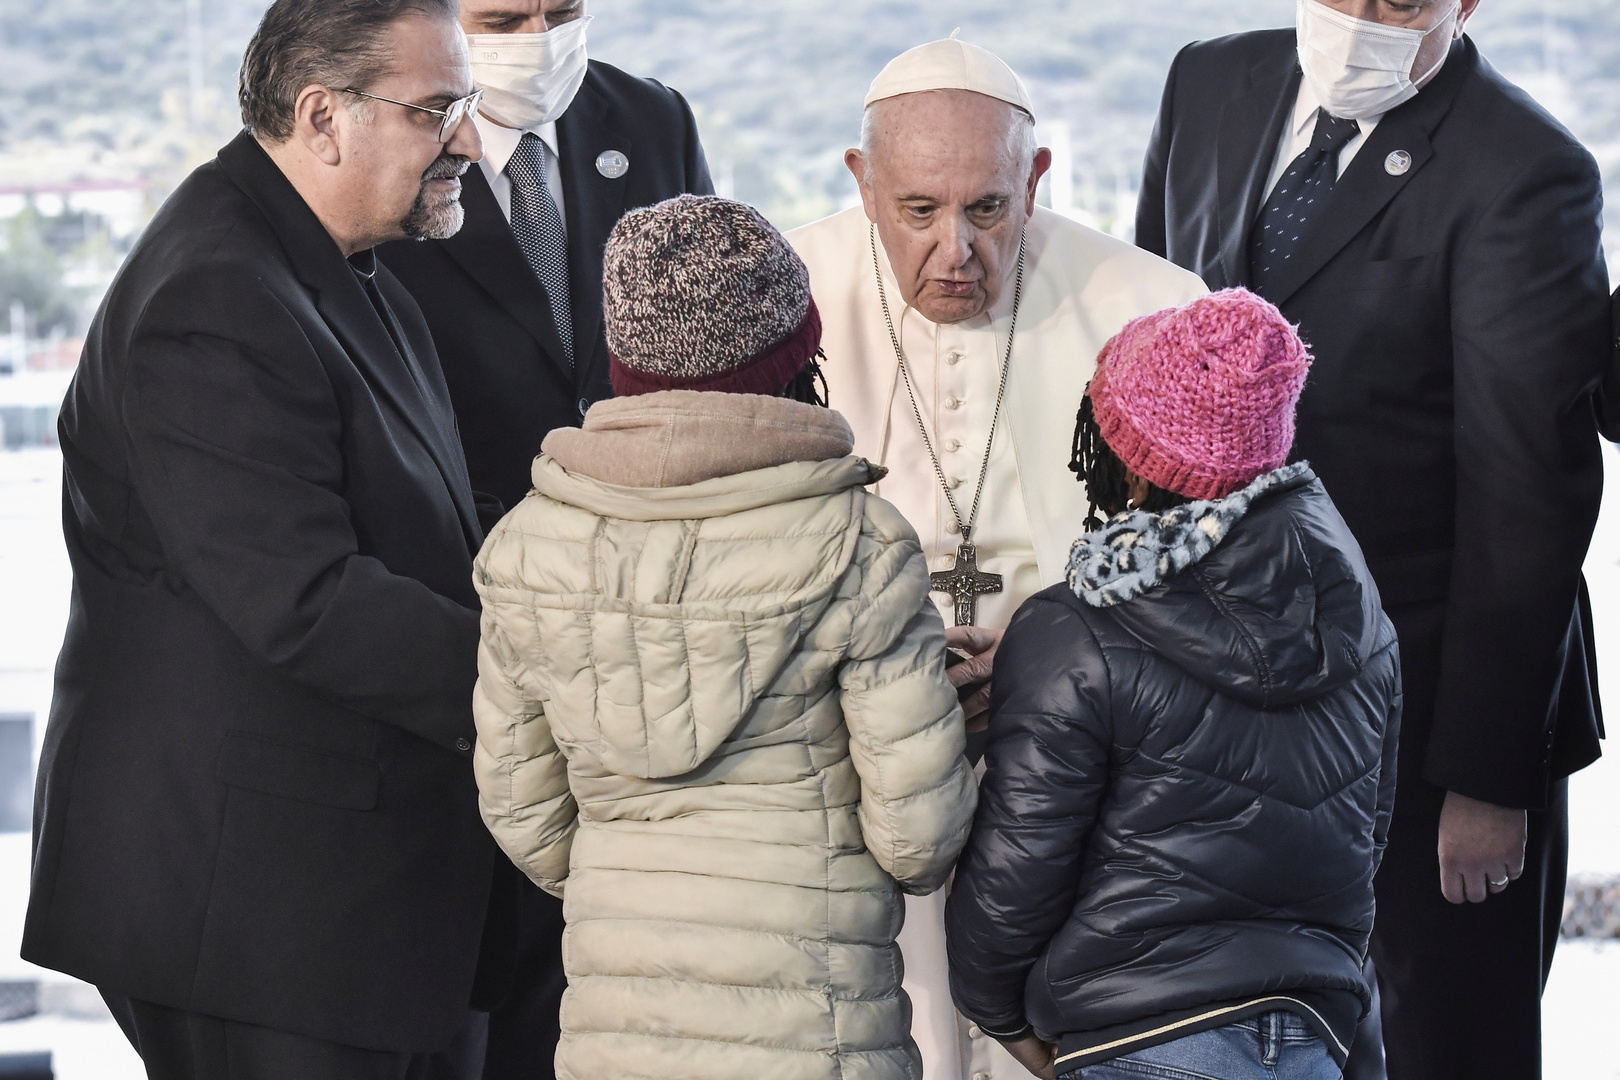 Pope Francis visits a refugee camp on the Greek island of Lesbos (photos)